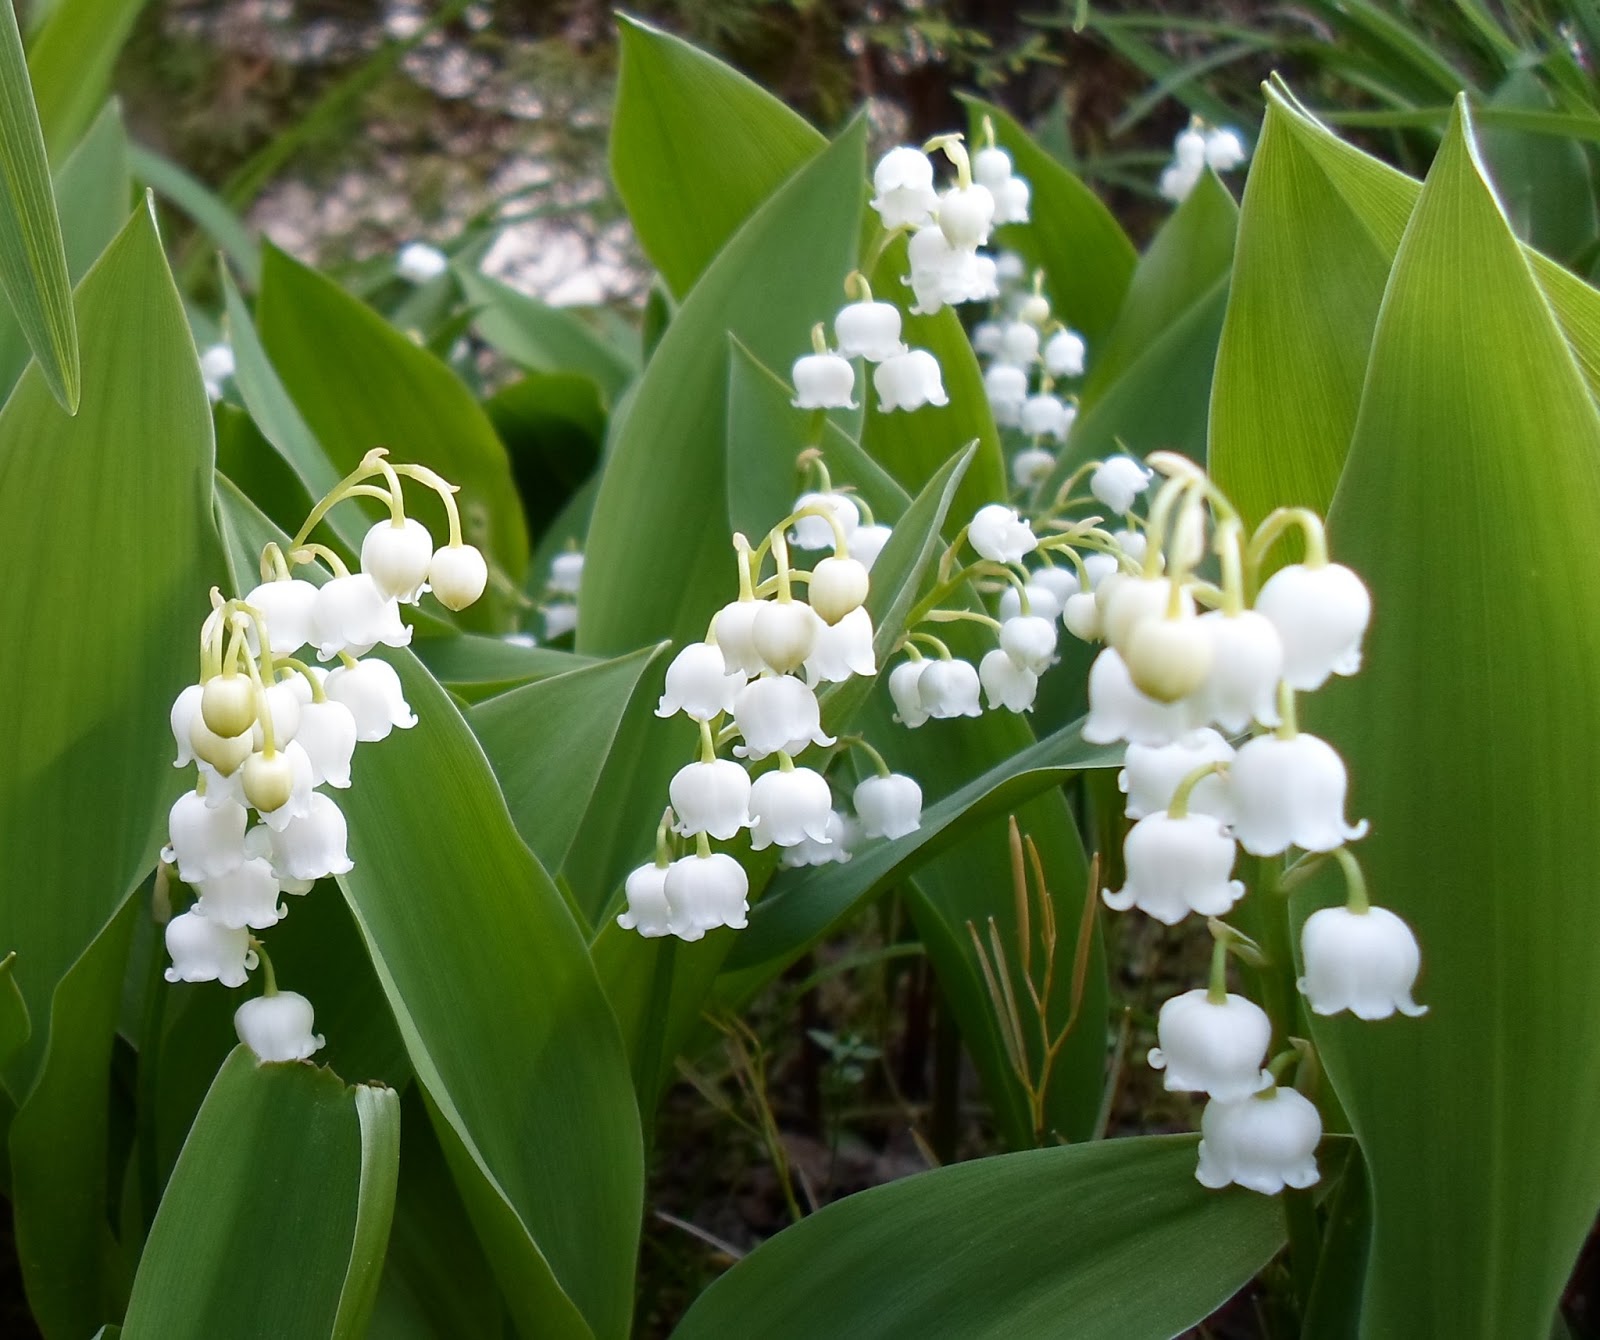 Happier Than A Pig In Mud: Lily of the Valley